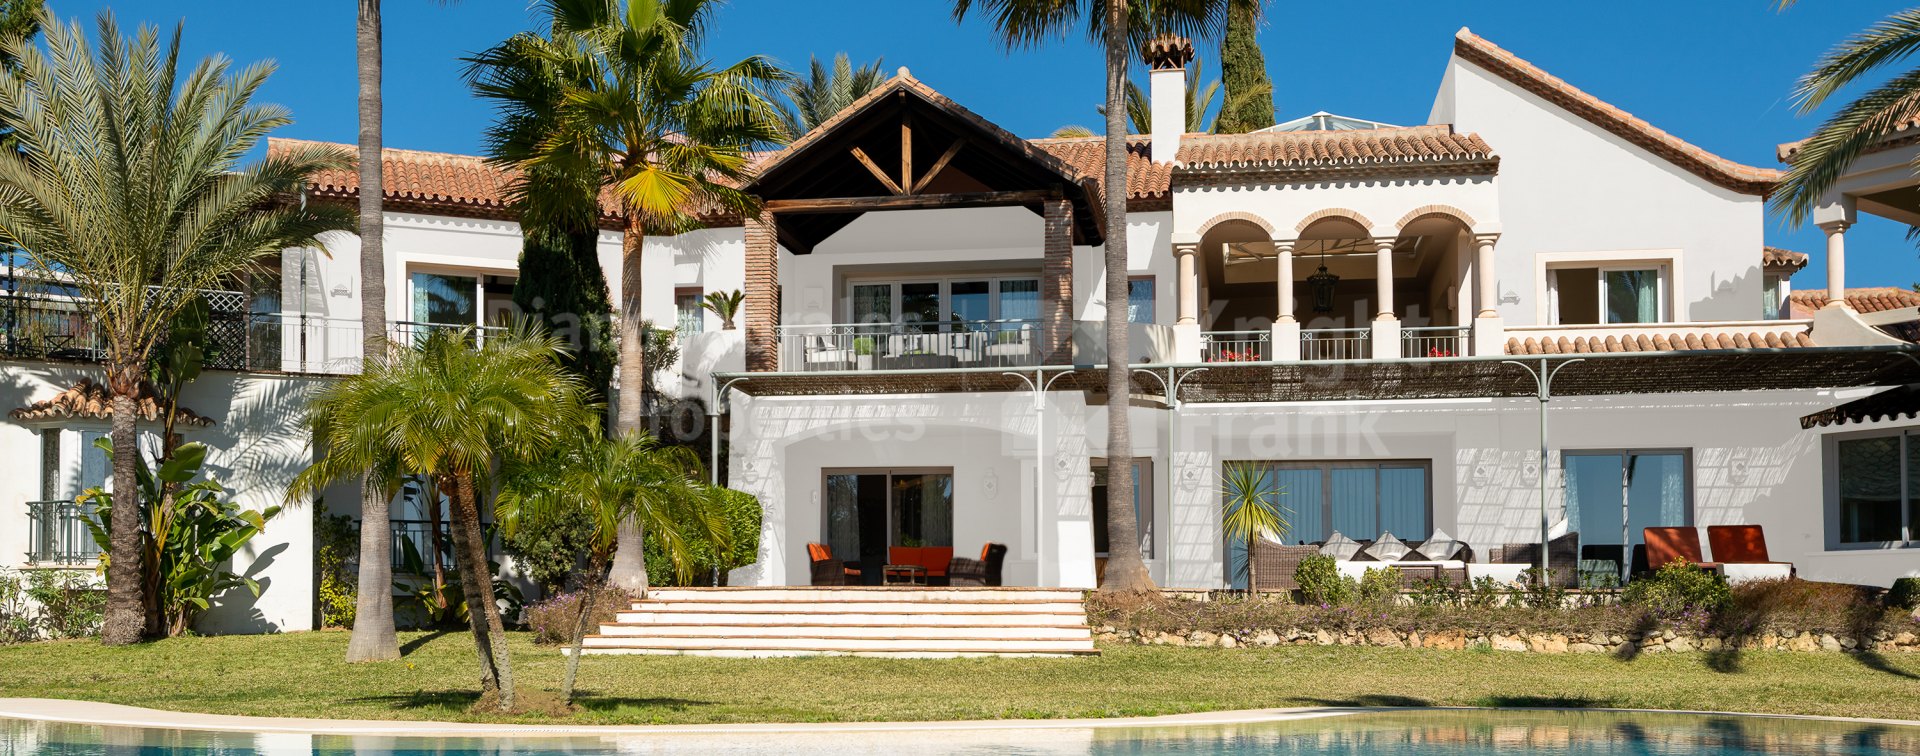 Great family house on one of the largest plots in Los Flamingos